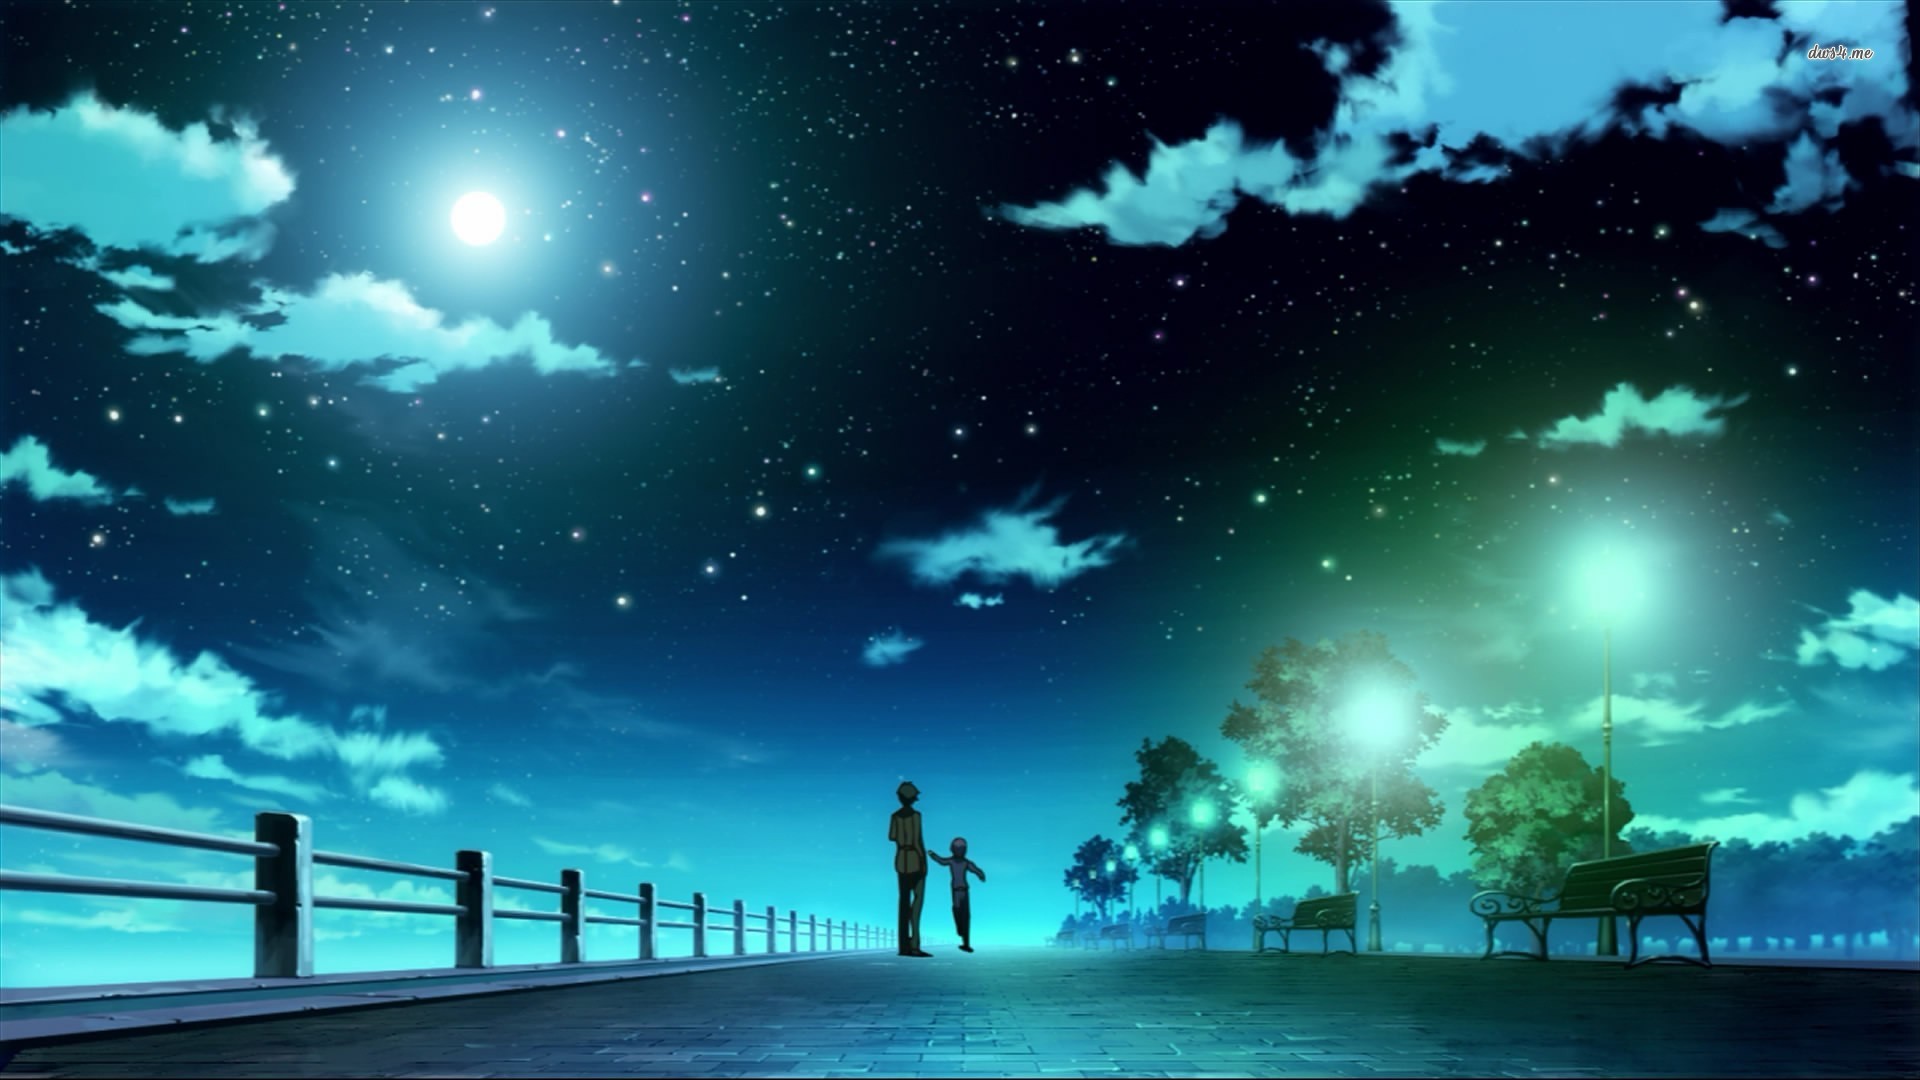 500+ Anime background blue High-definition images for your devices